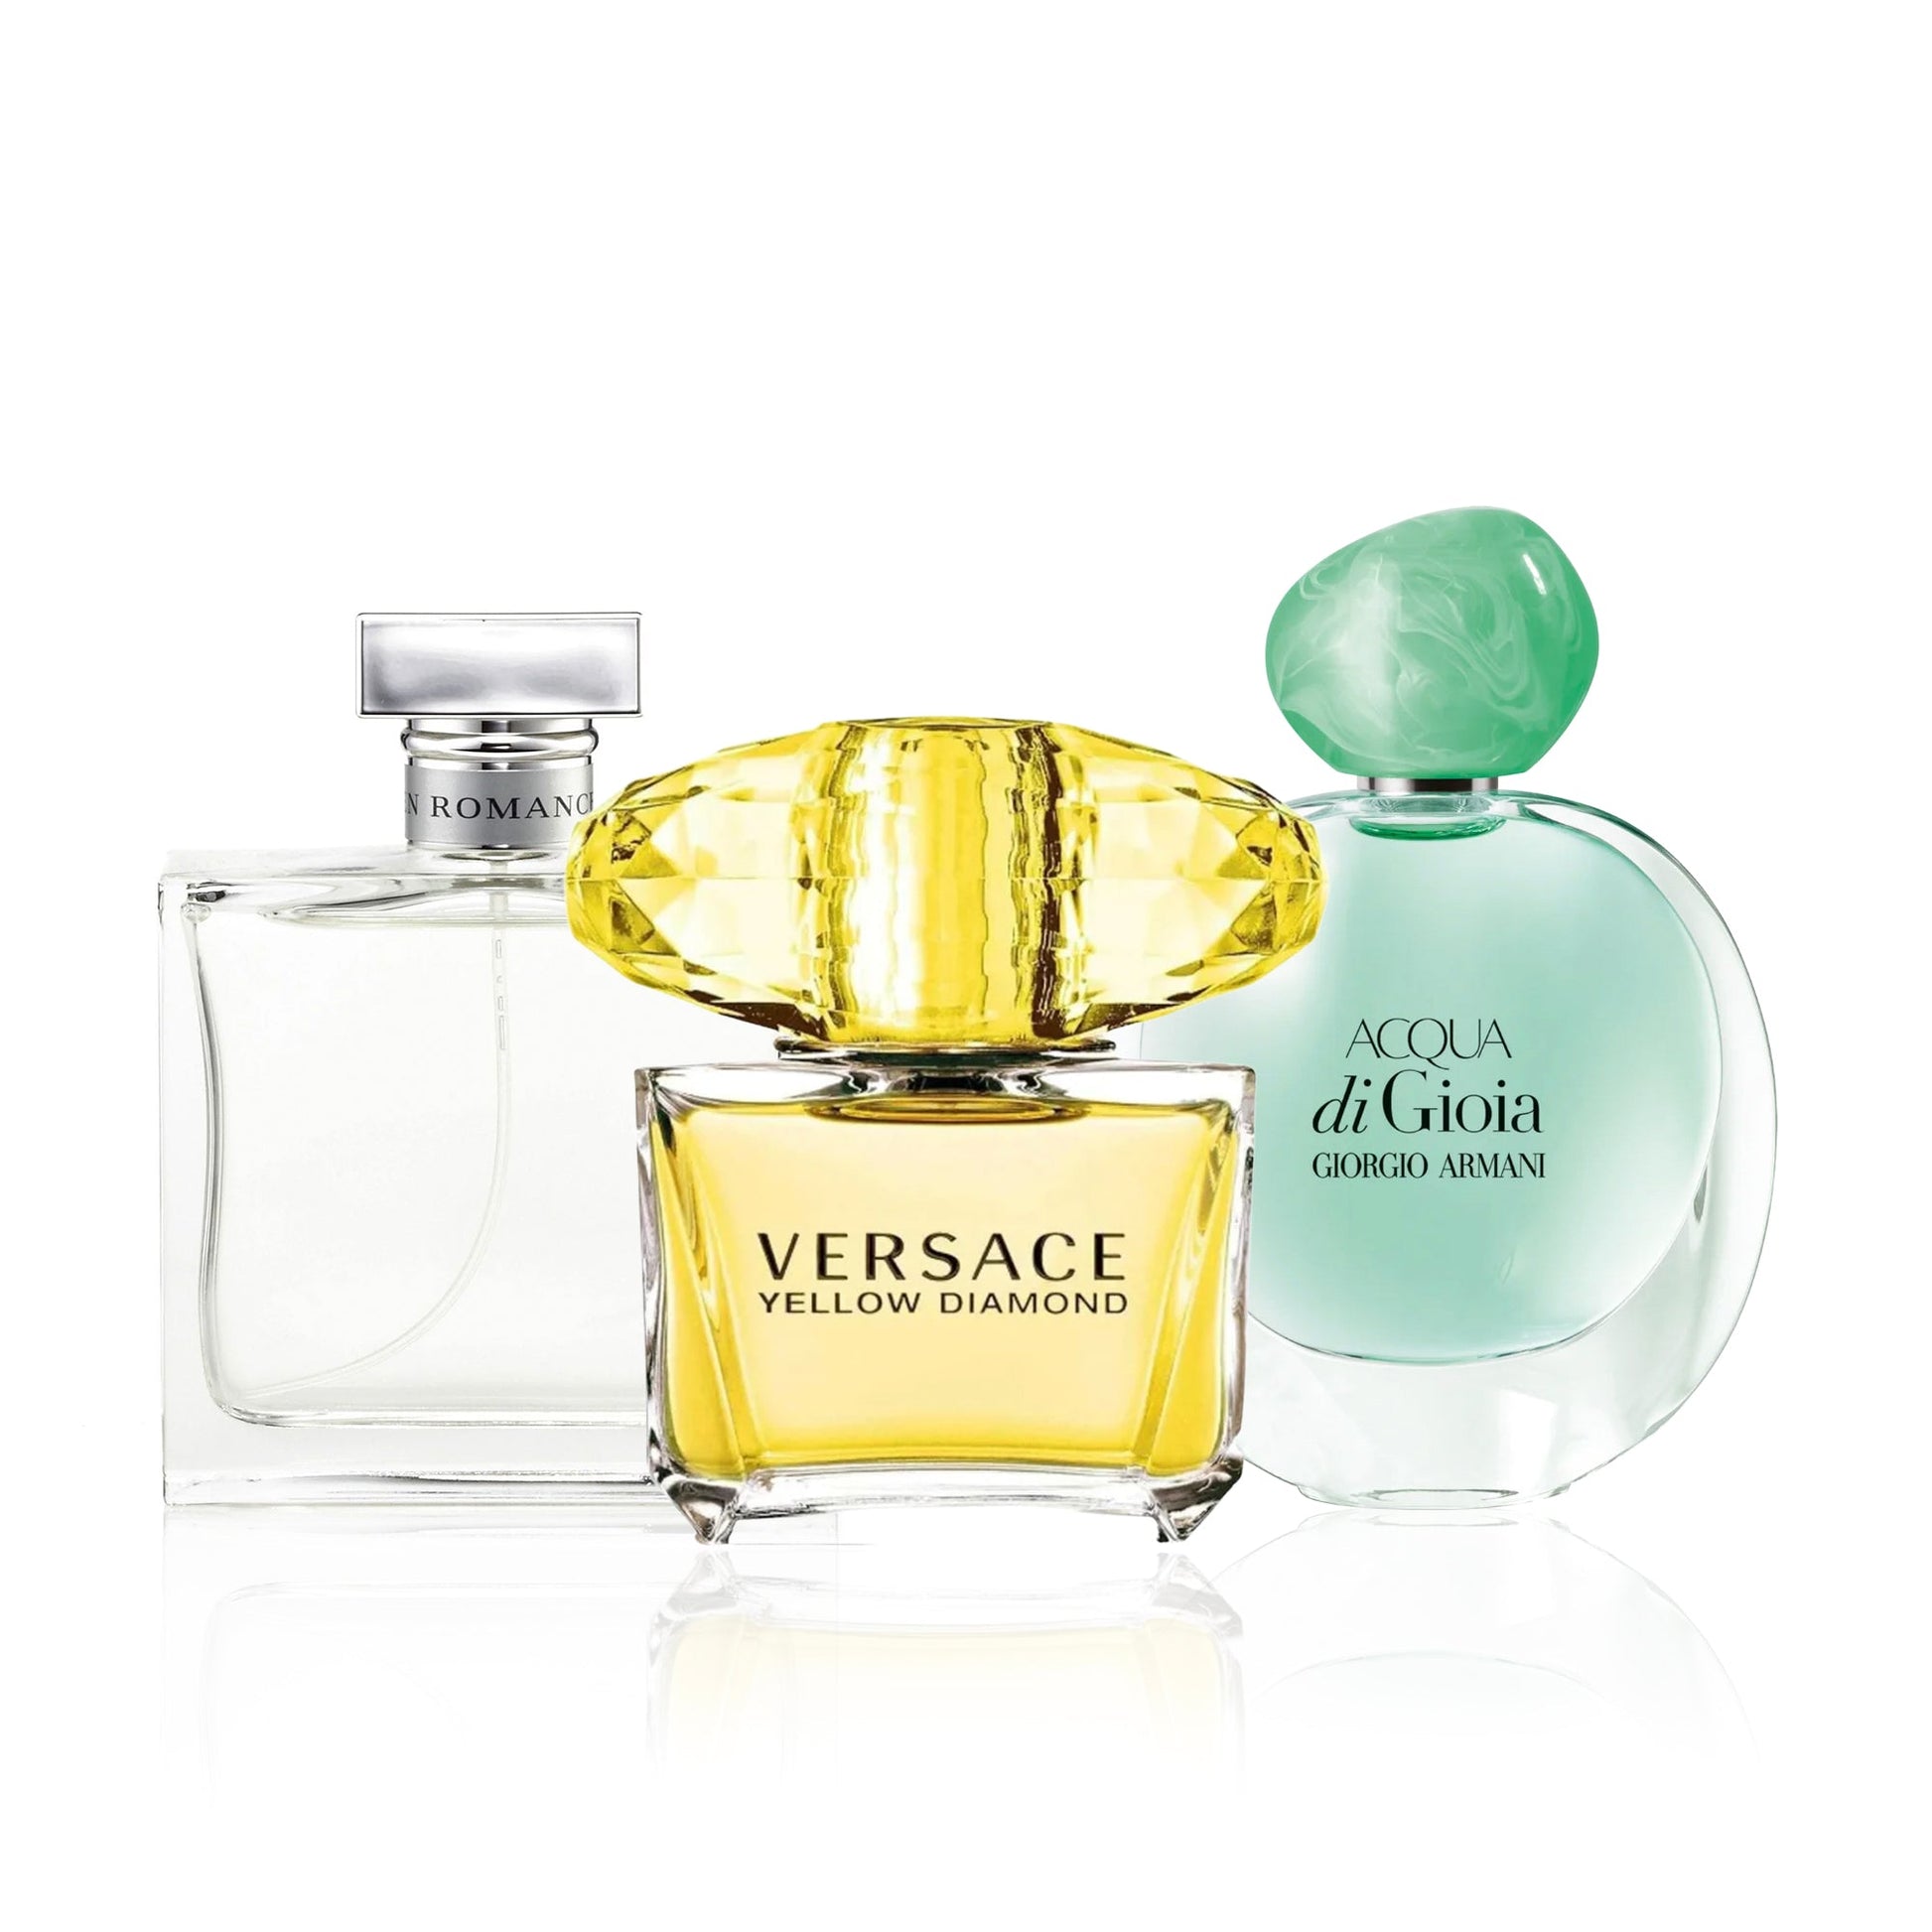 Bundle Deal For Women: Romance by Ralph Lauren and Yellow Diamond by Versace and Acqua Di Gioia by Giorgio Armani, Product image 1